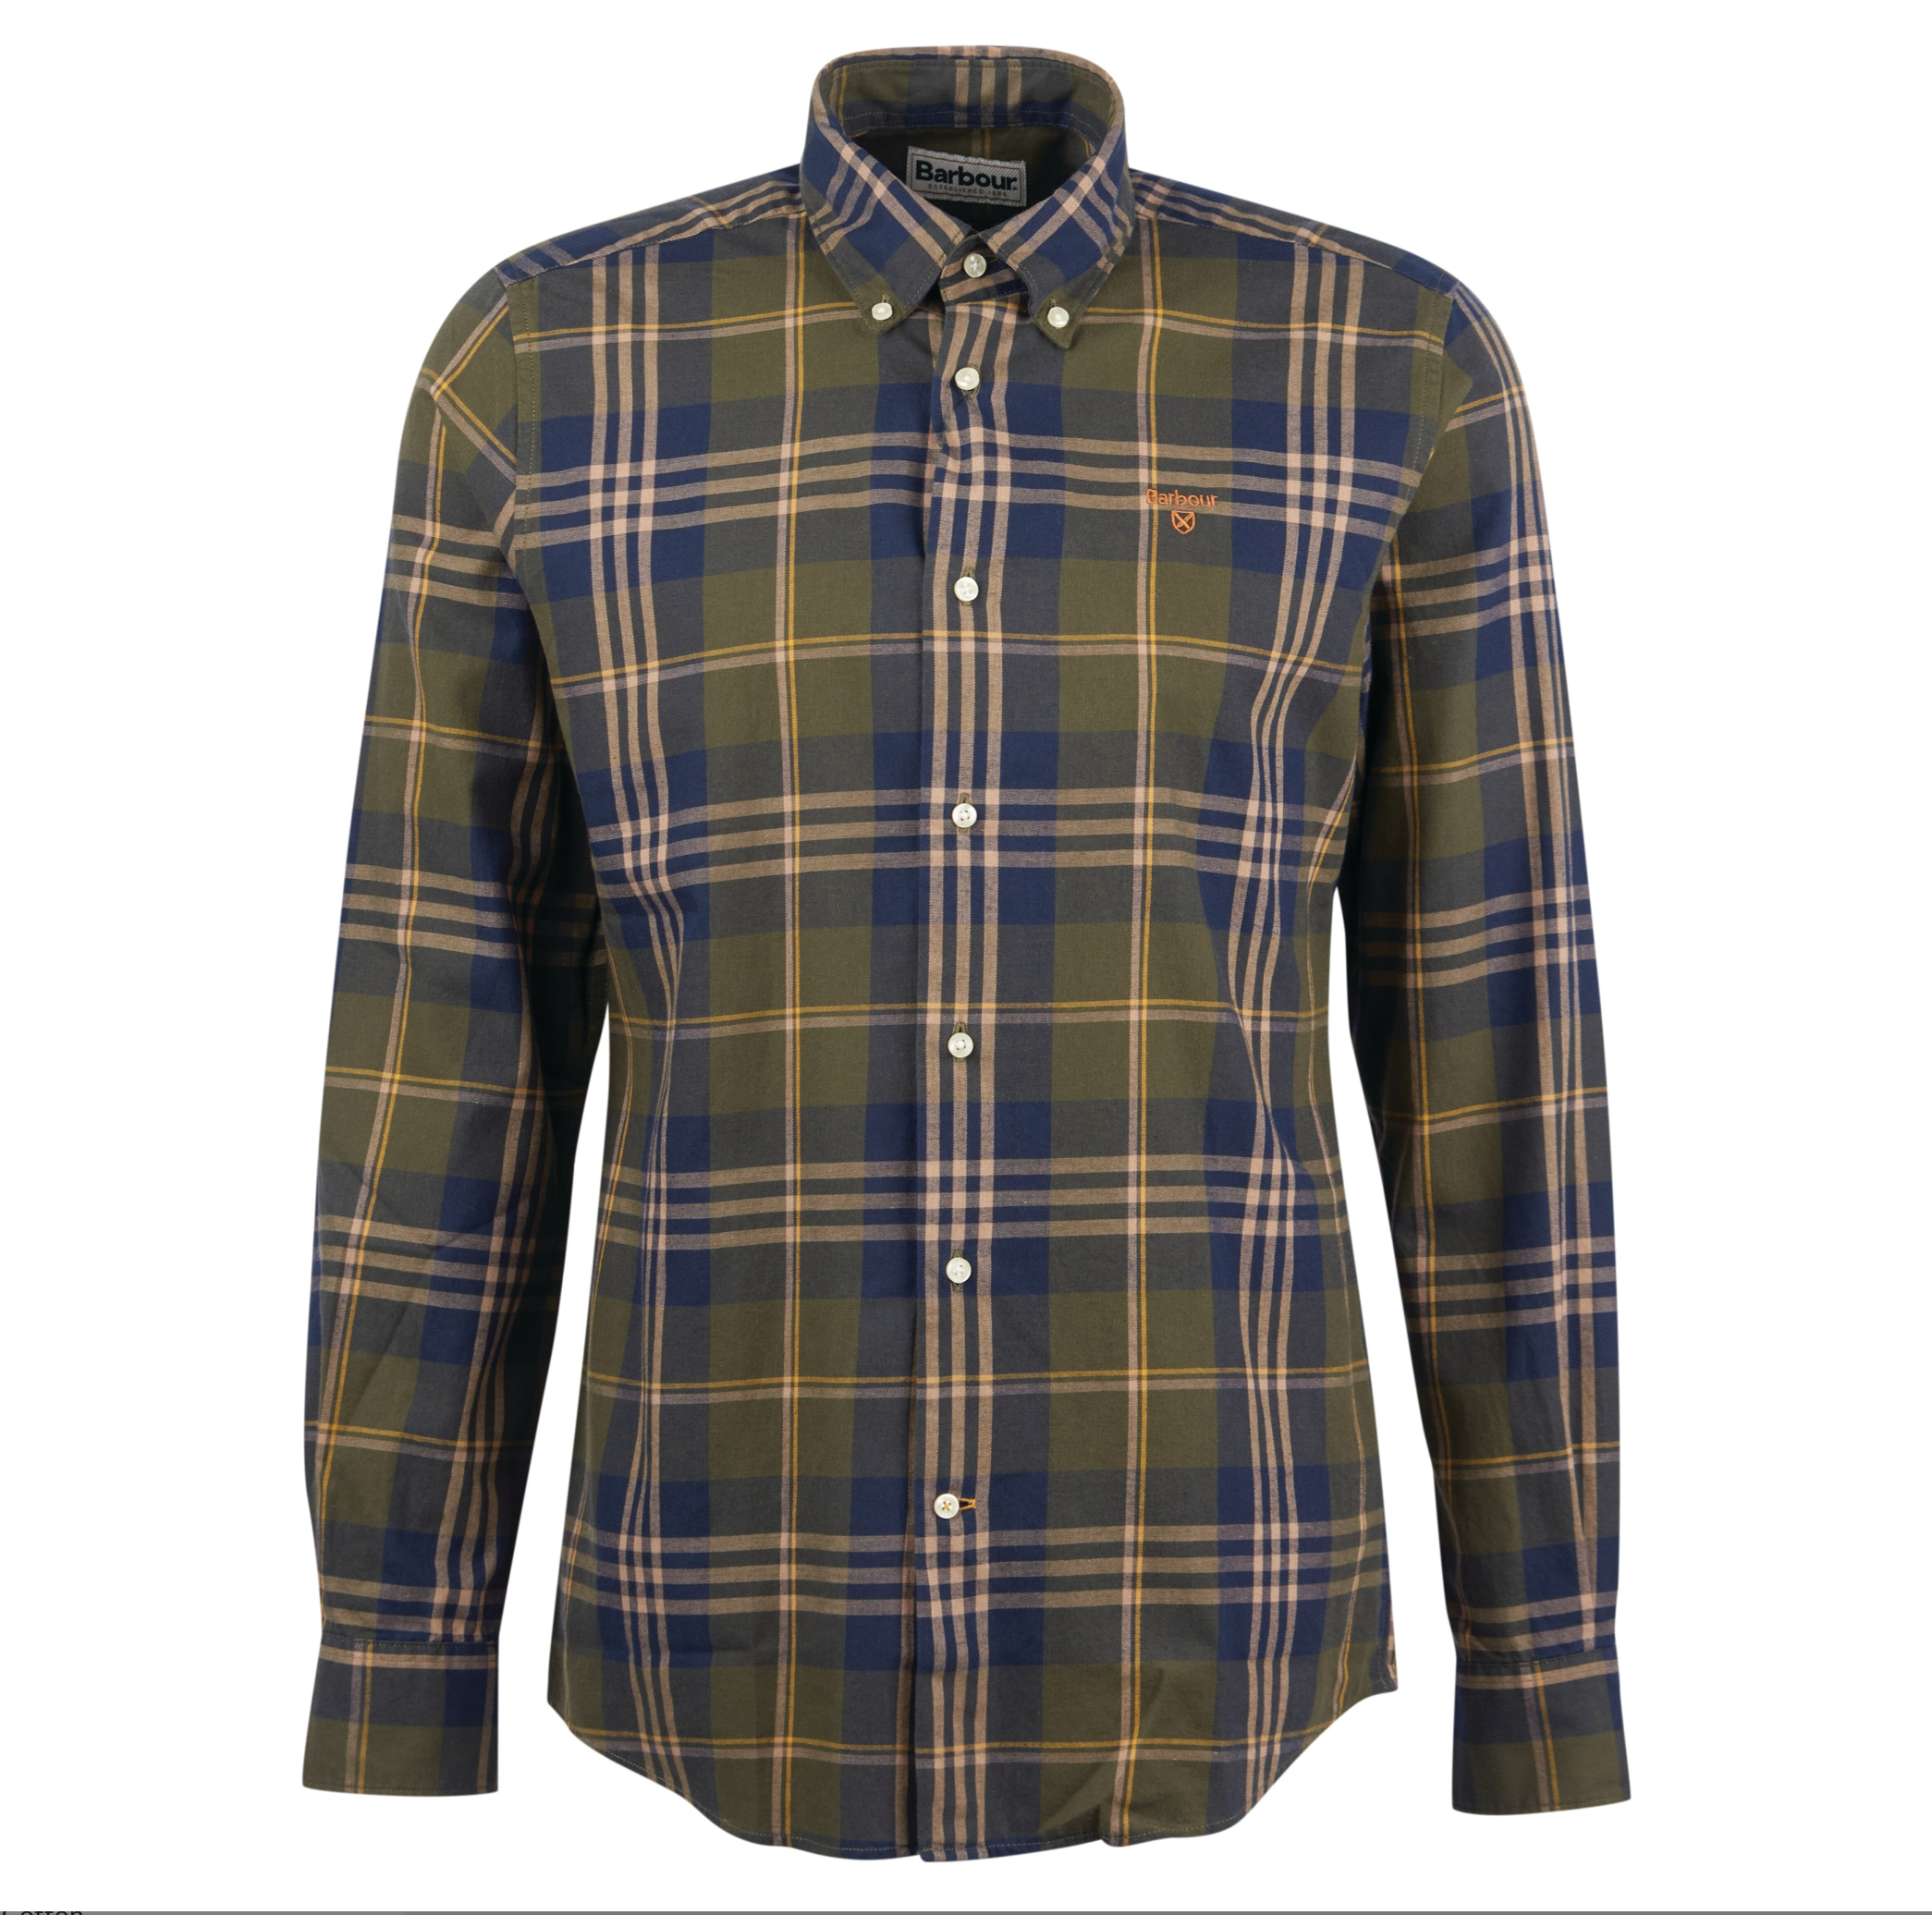 BARBOUR EDGAR TAILORED SHIRT - OLIVE